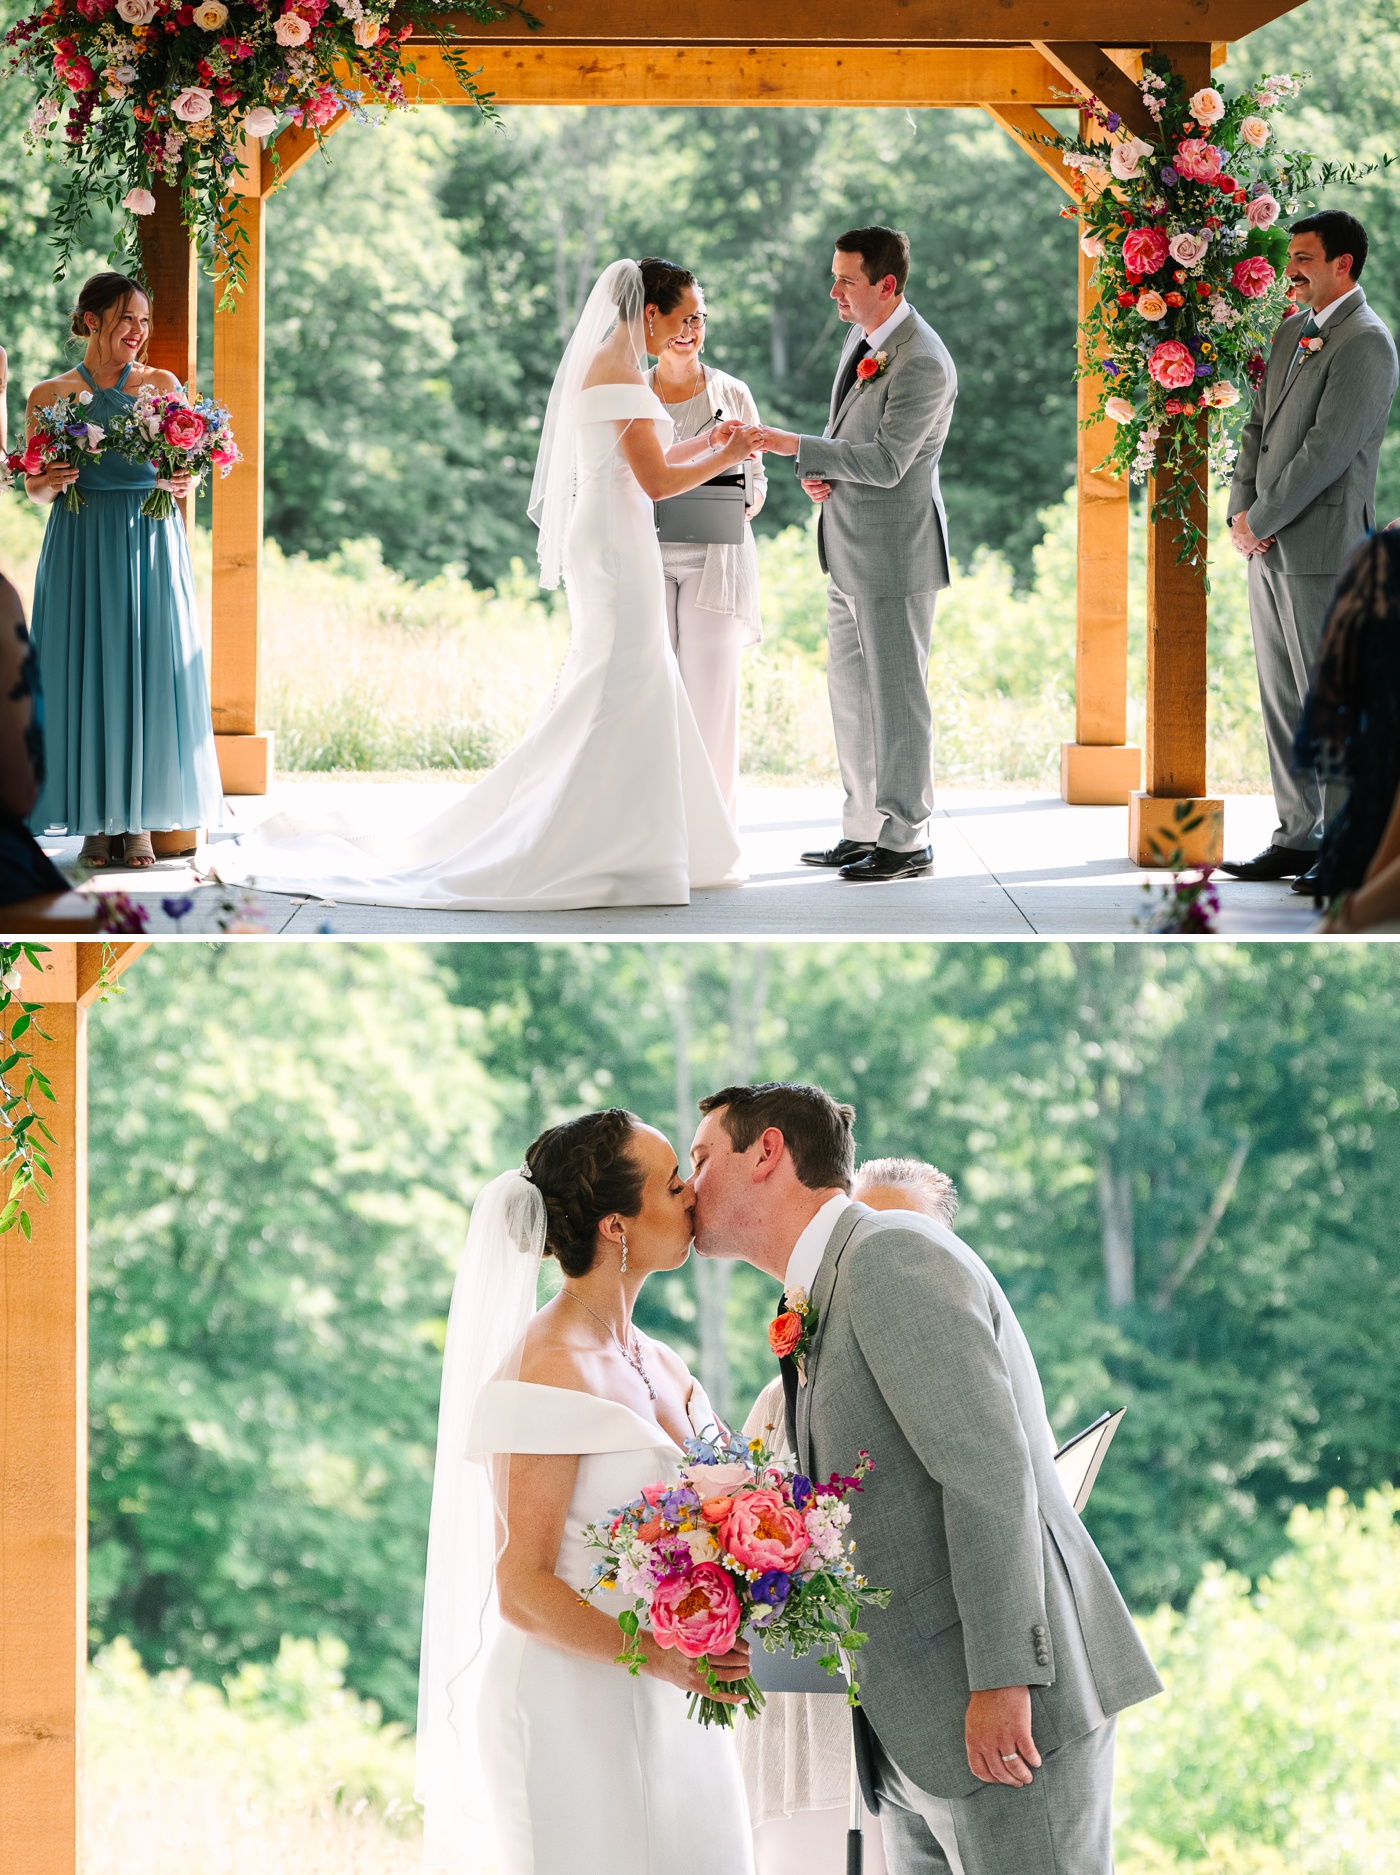 Outdoor wedding ceremony at The Wilds